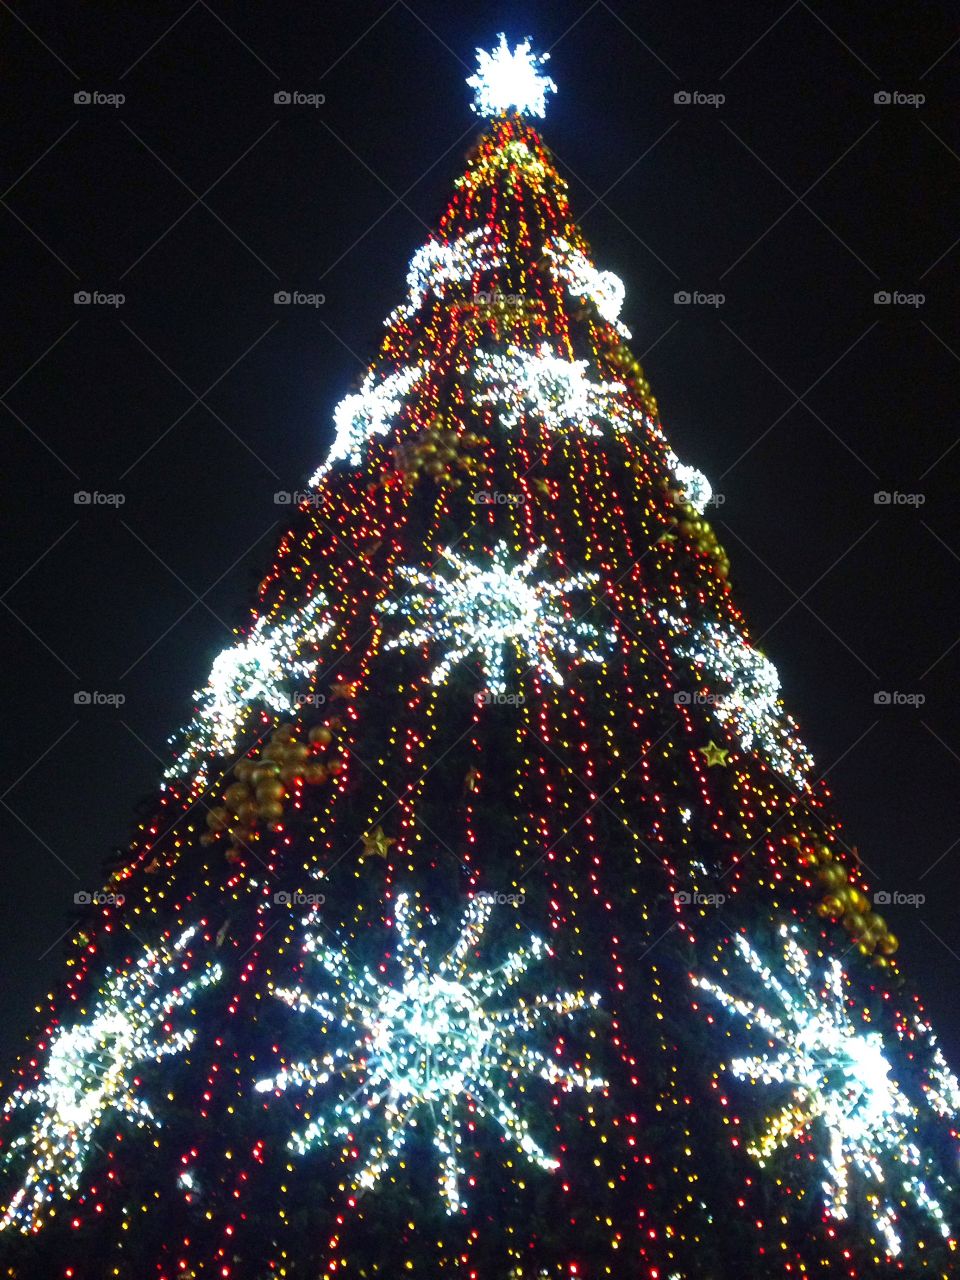 Bright colored illumination on artificial Christmas fir tree in the evening on black sky background in Moscow, Russia